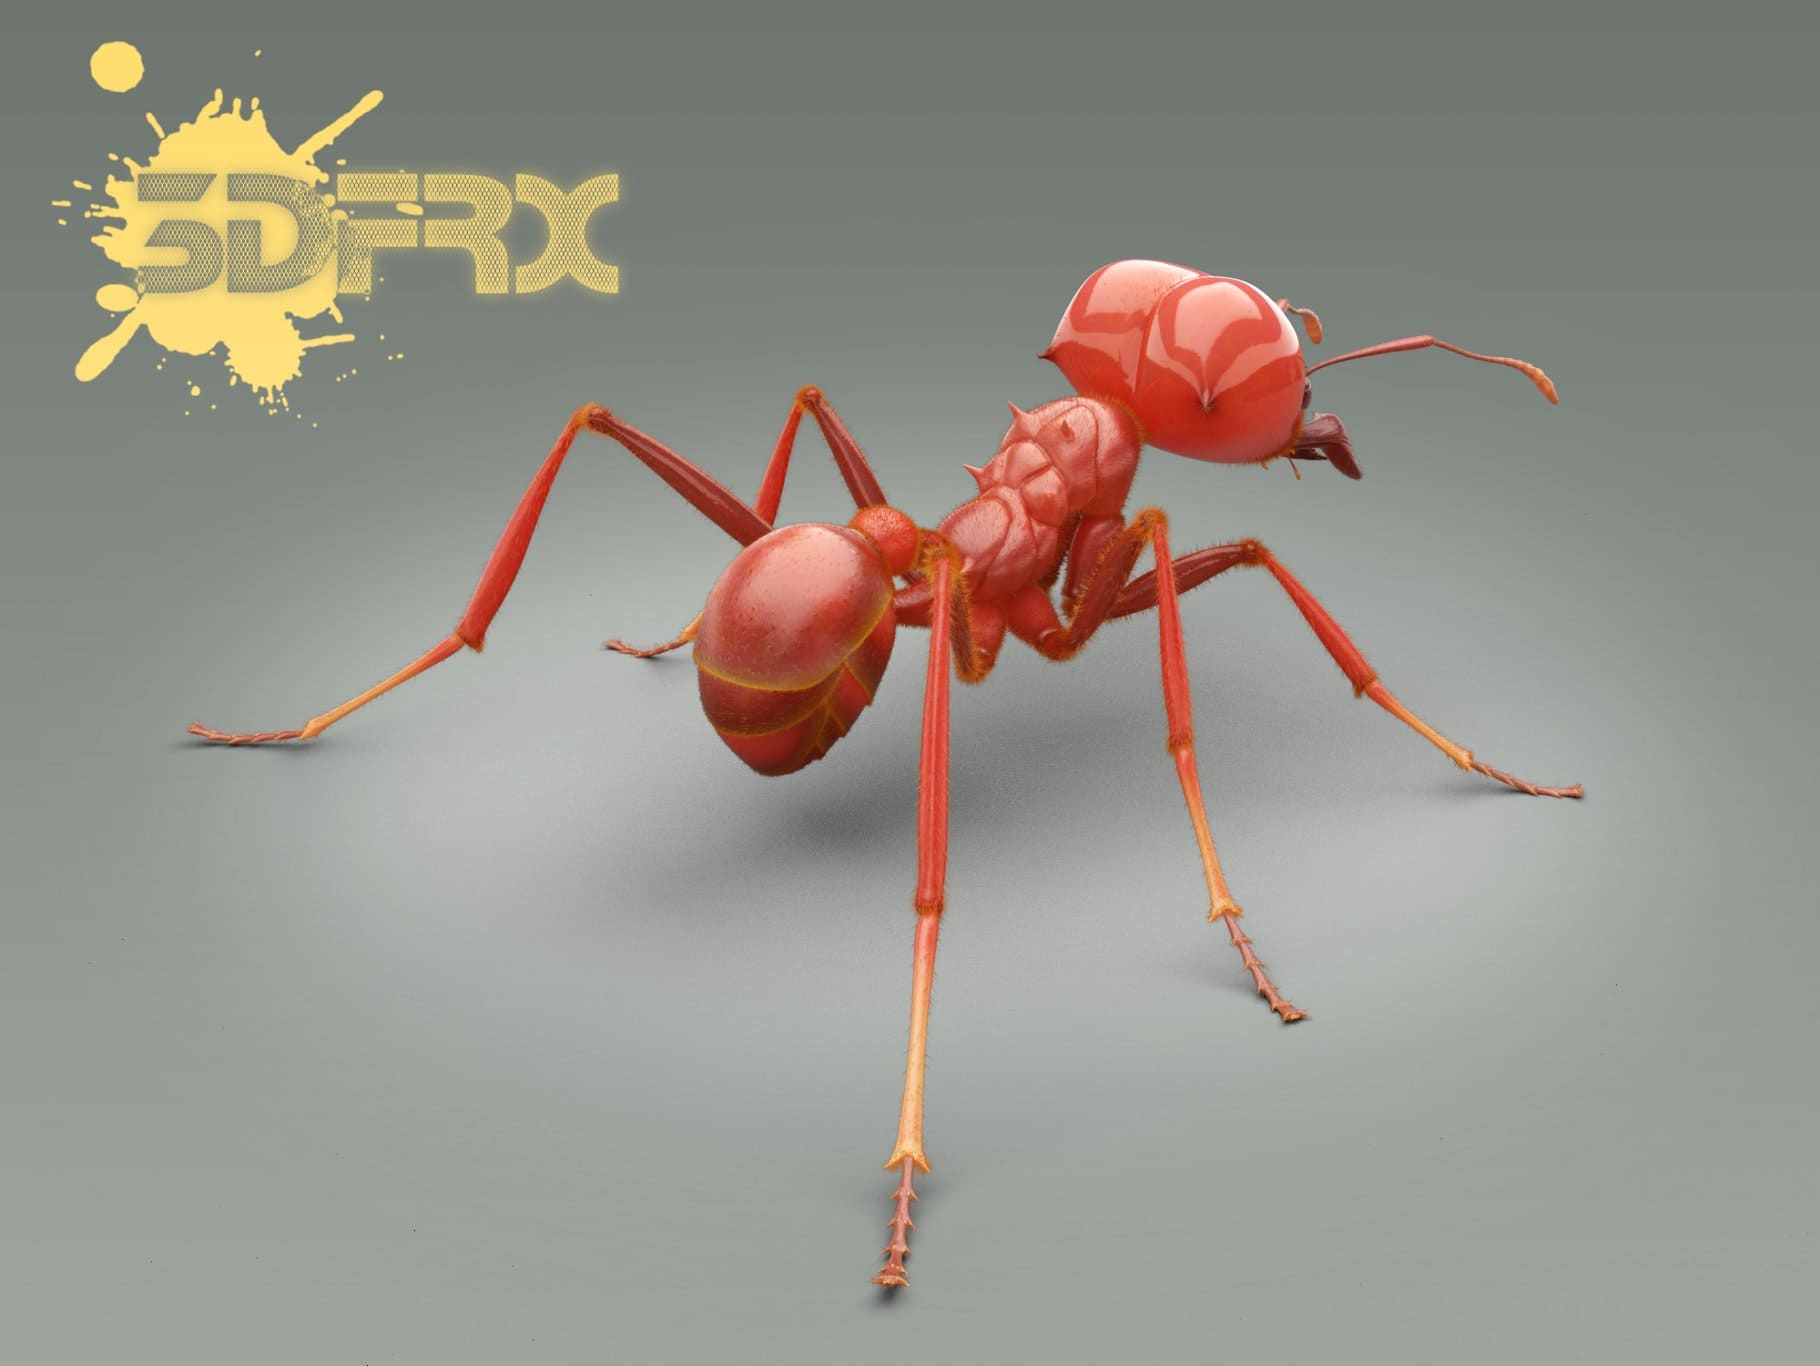 Rear view of a red ant model.